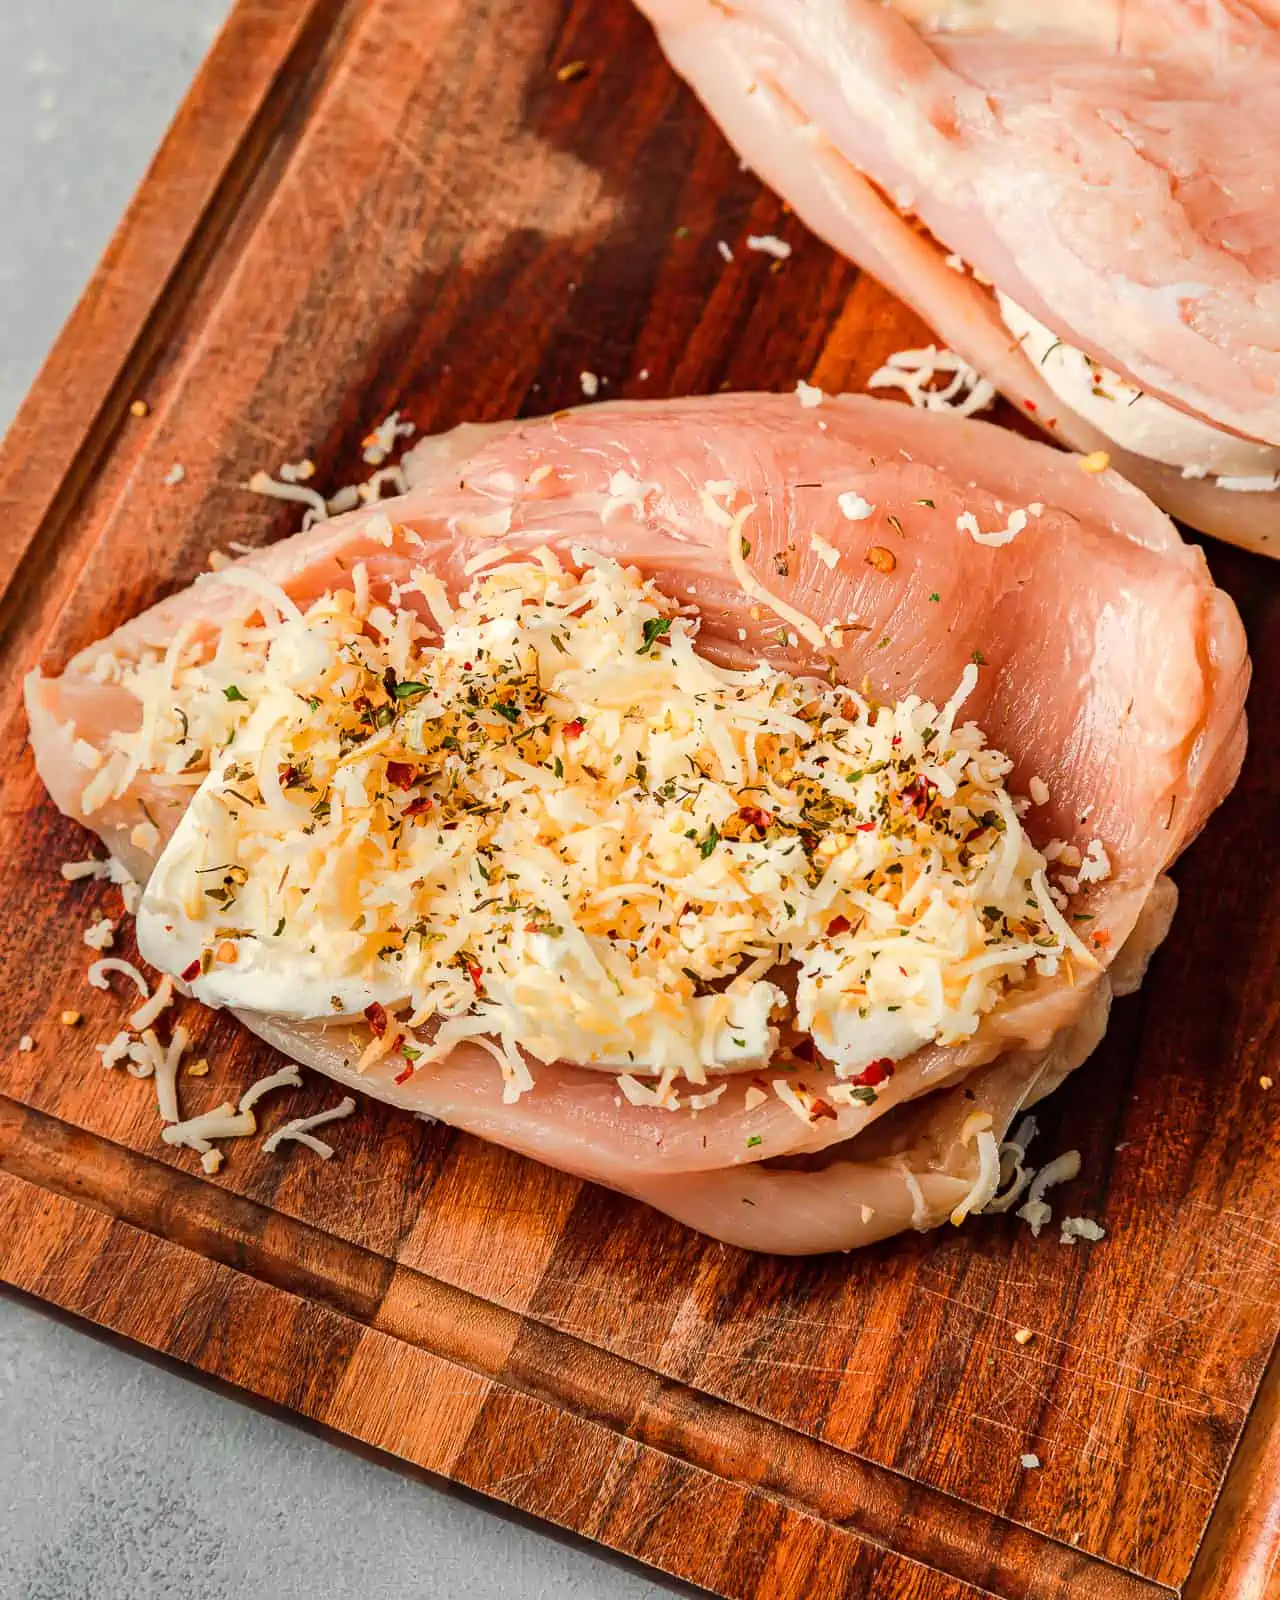 Raw Chicken stuffed with Mozzarella and seasoned with Spiceology's Pizza Pie Spice Blend